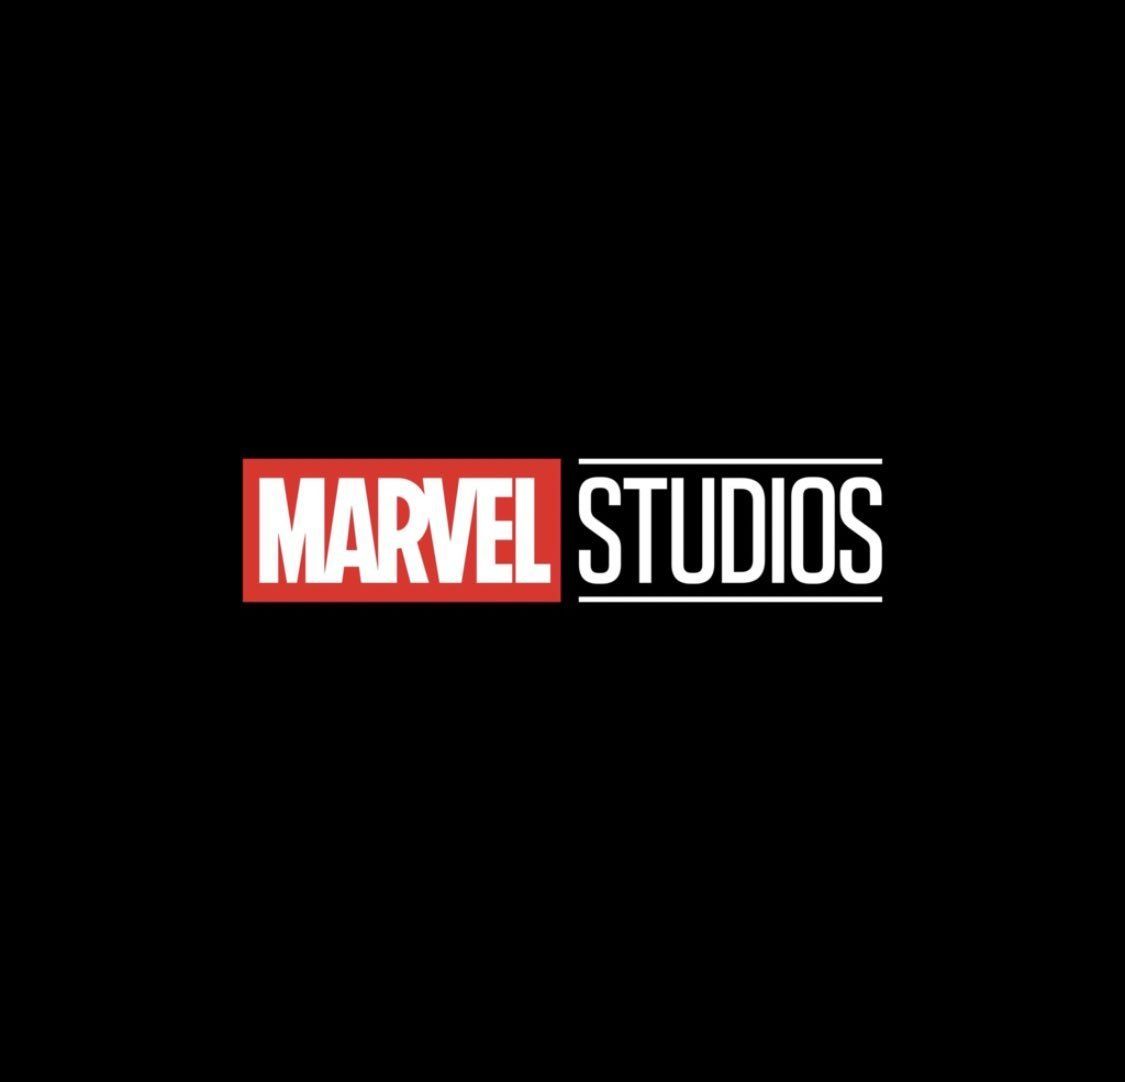 Every upcoming MCU movie and TV show